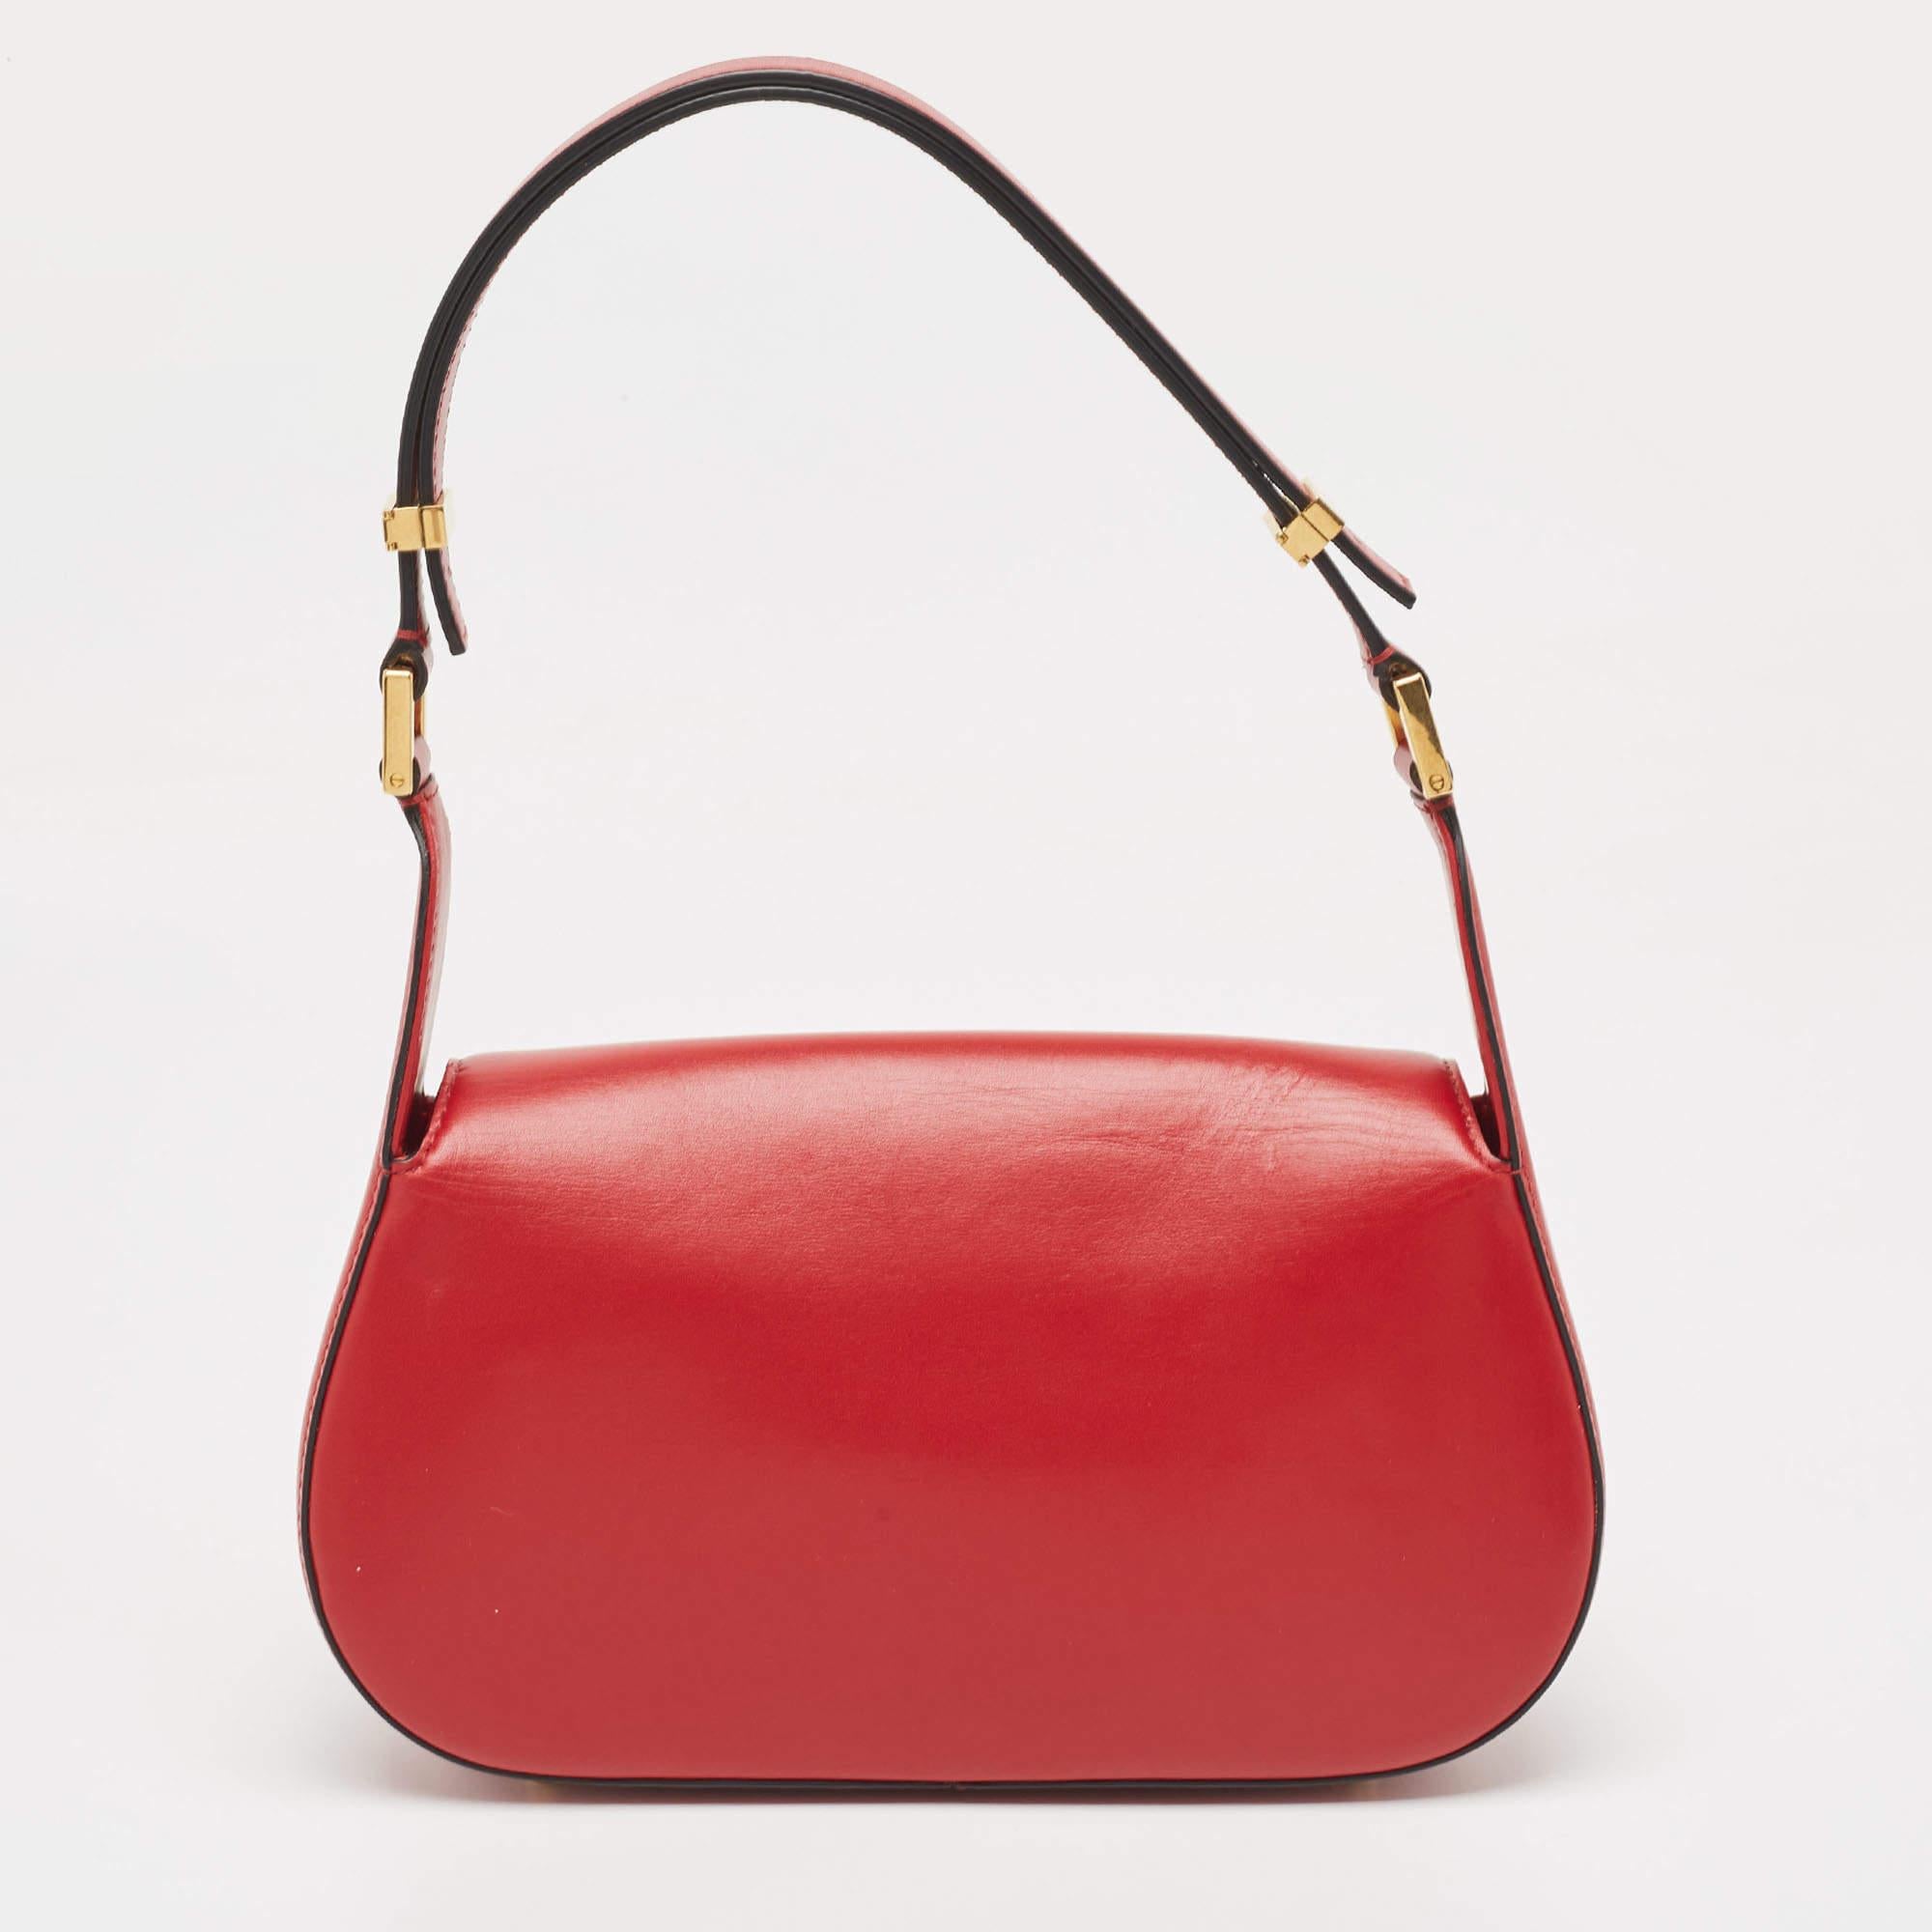 The Valentino bag exudes timeless elegance with its vibrant red hue and luxurious leather construction. Adorned with the iconic VLogo hardware, it boasts a chic chain strap for versatile styling. This sophisticated accessory effortlessly elevates